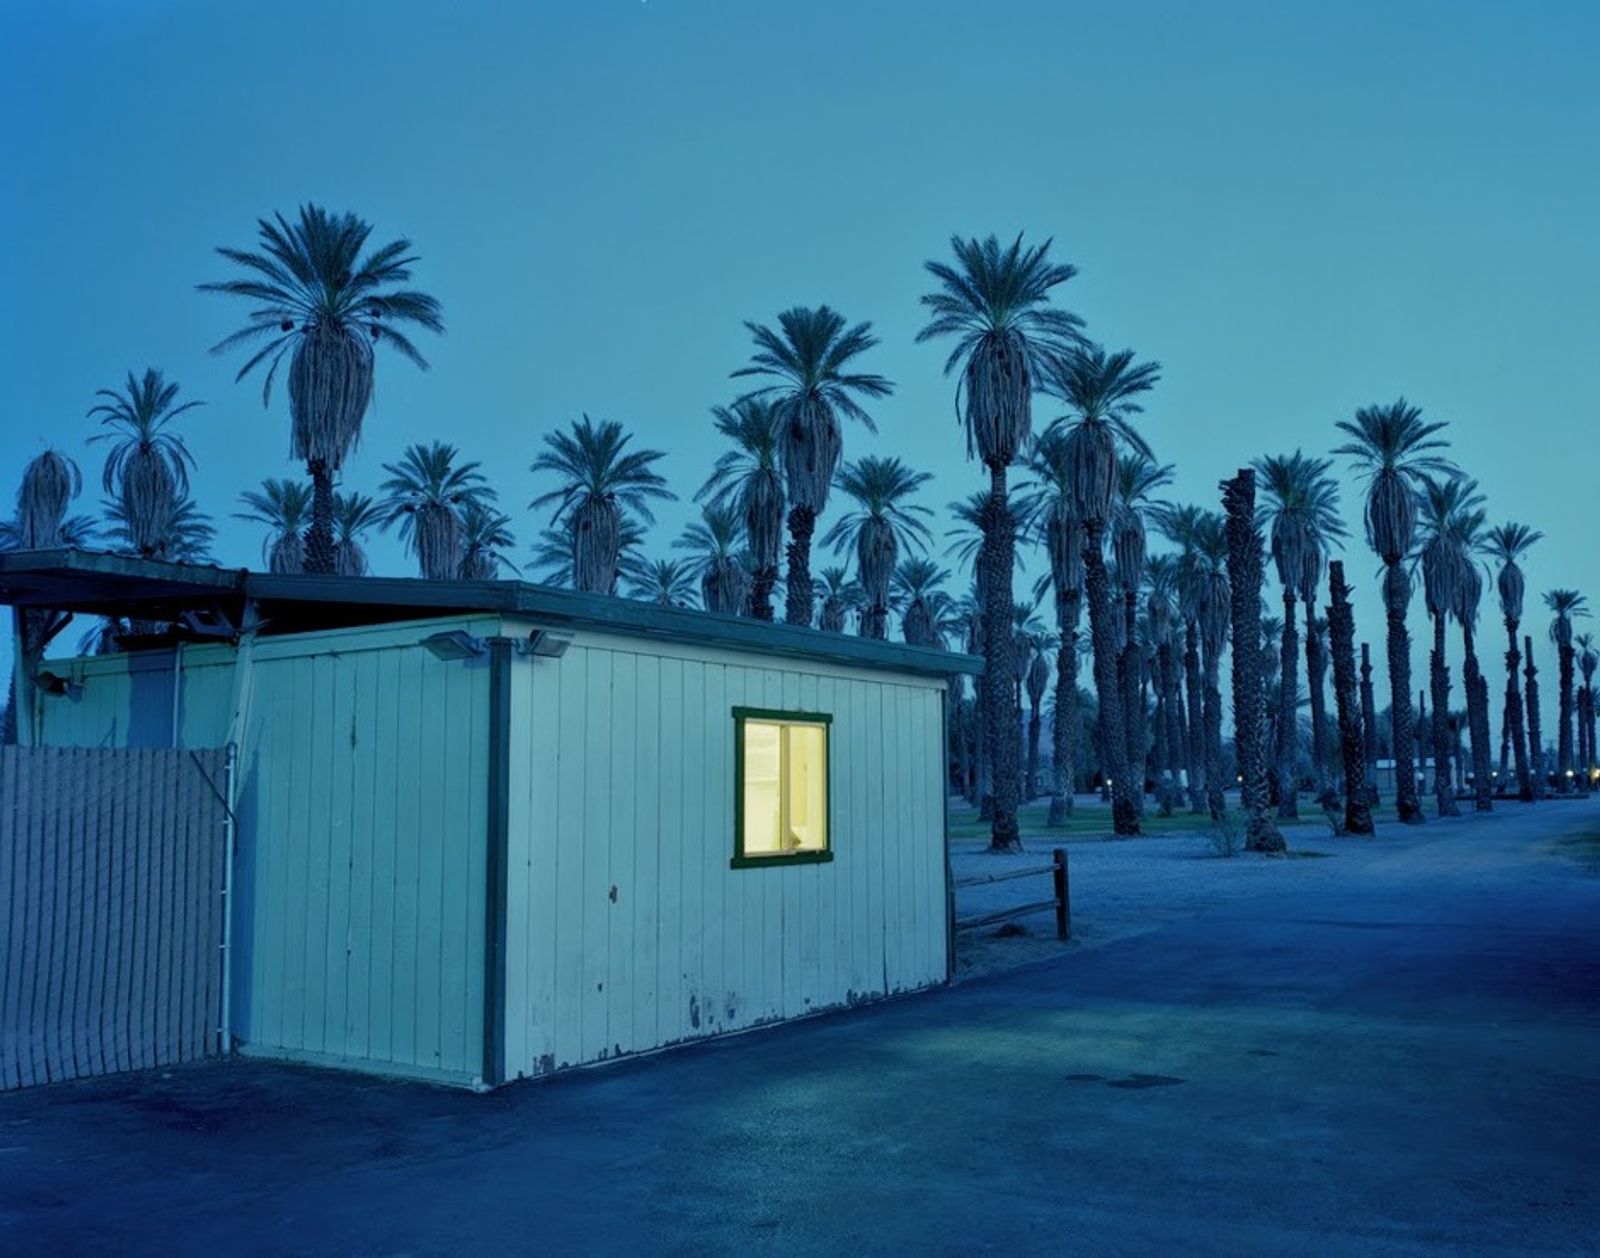 © Marcus Doyle - Hut and Palms at night